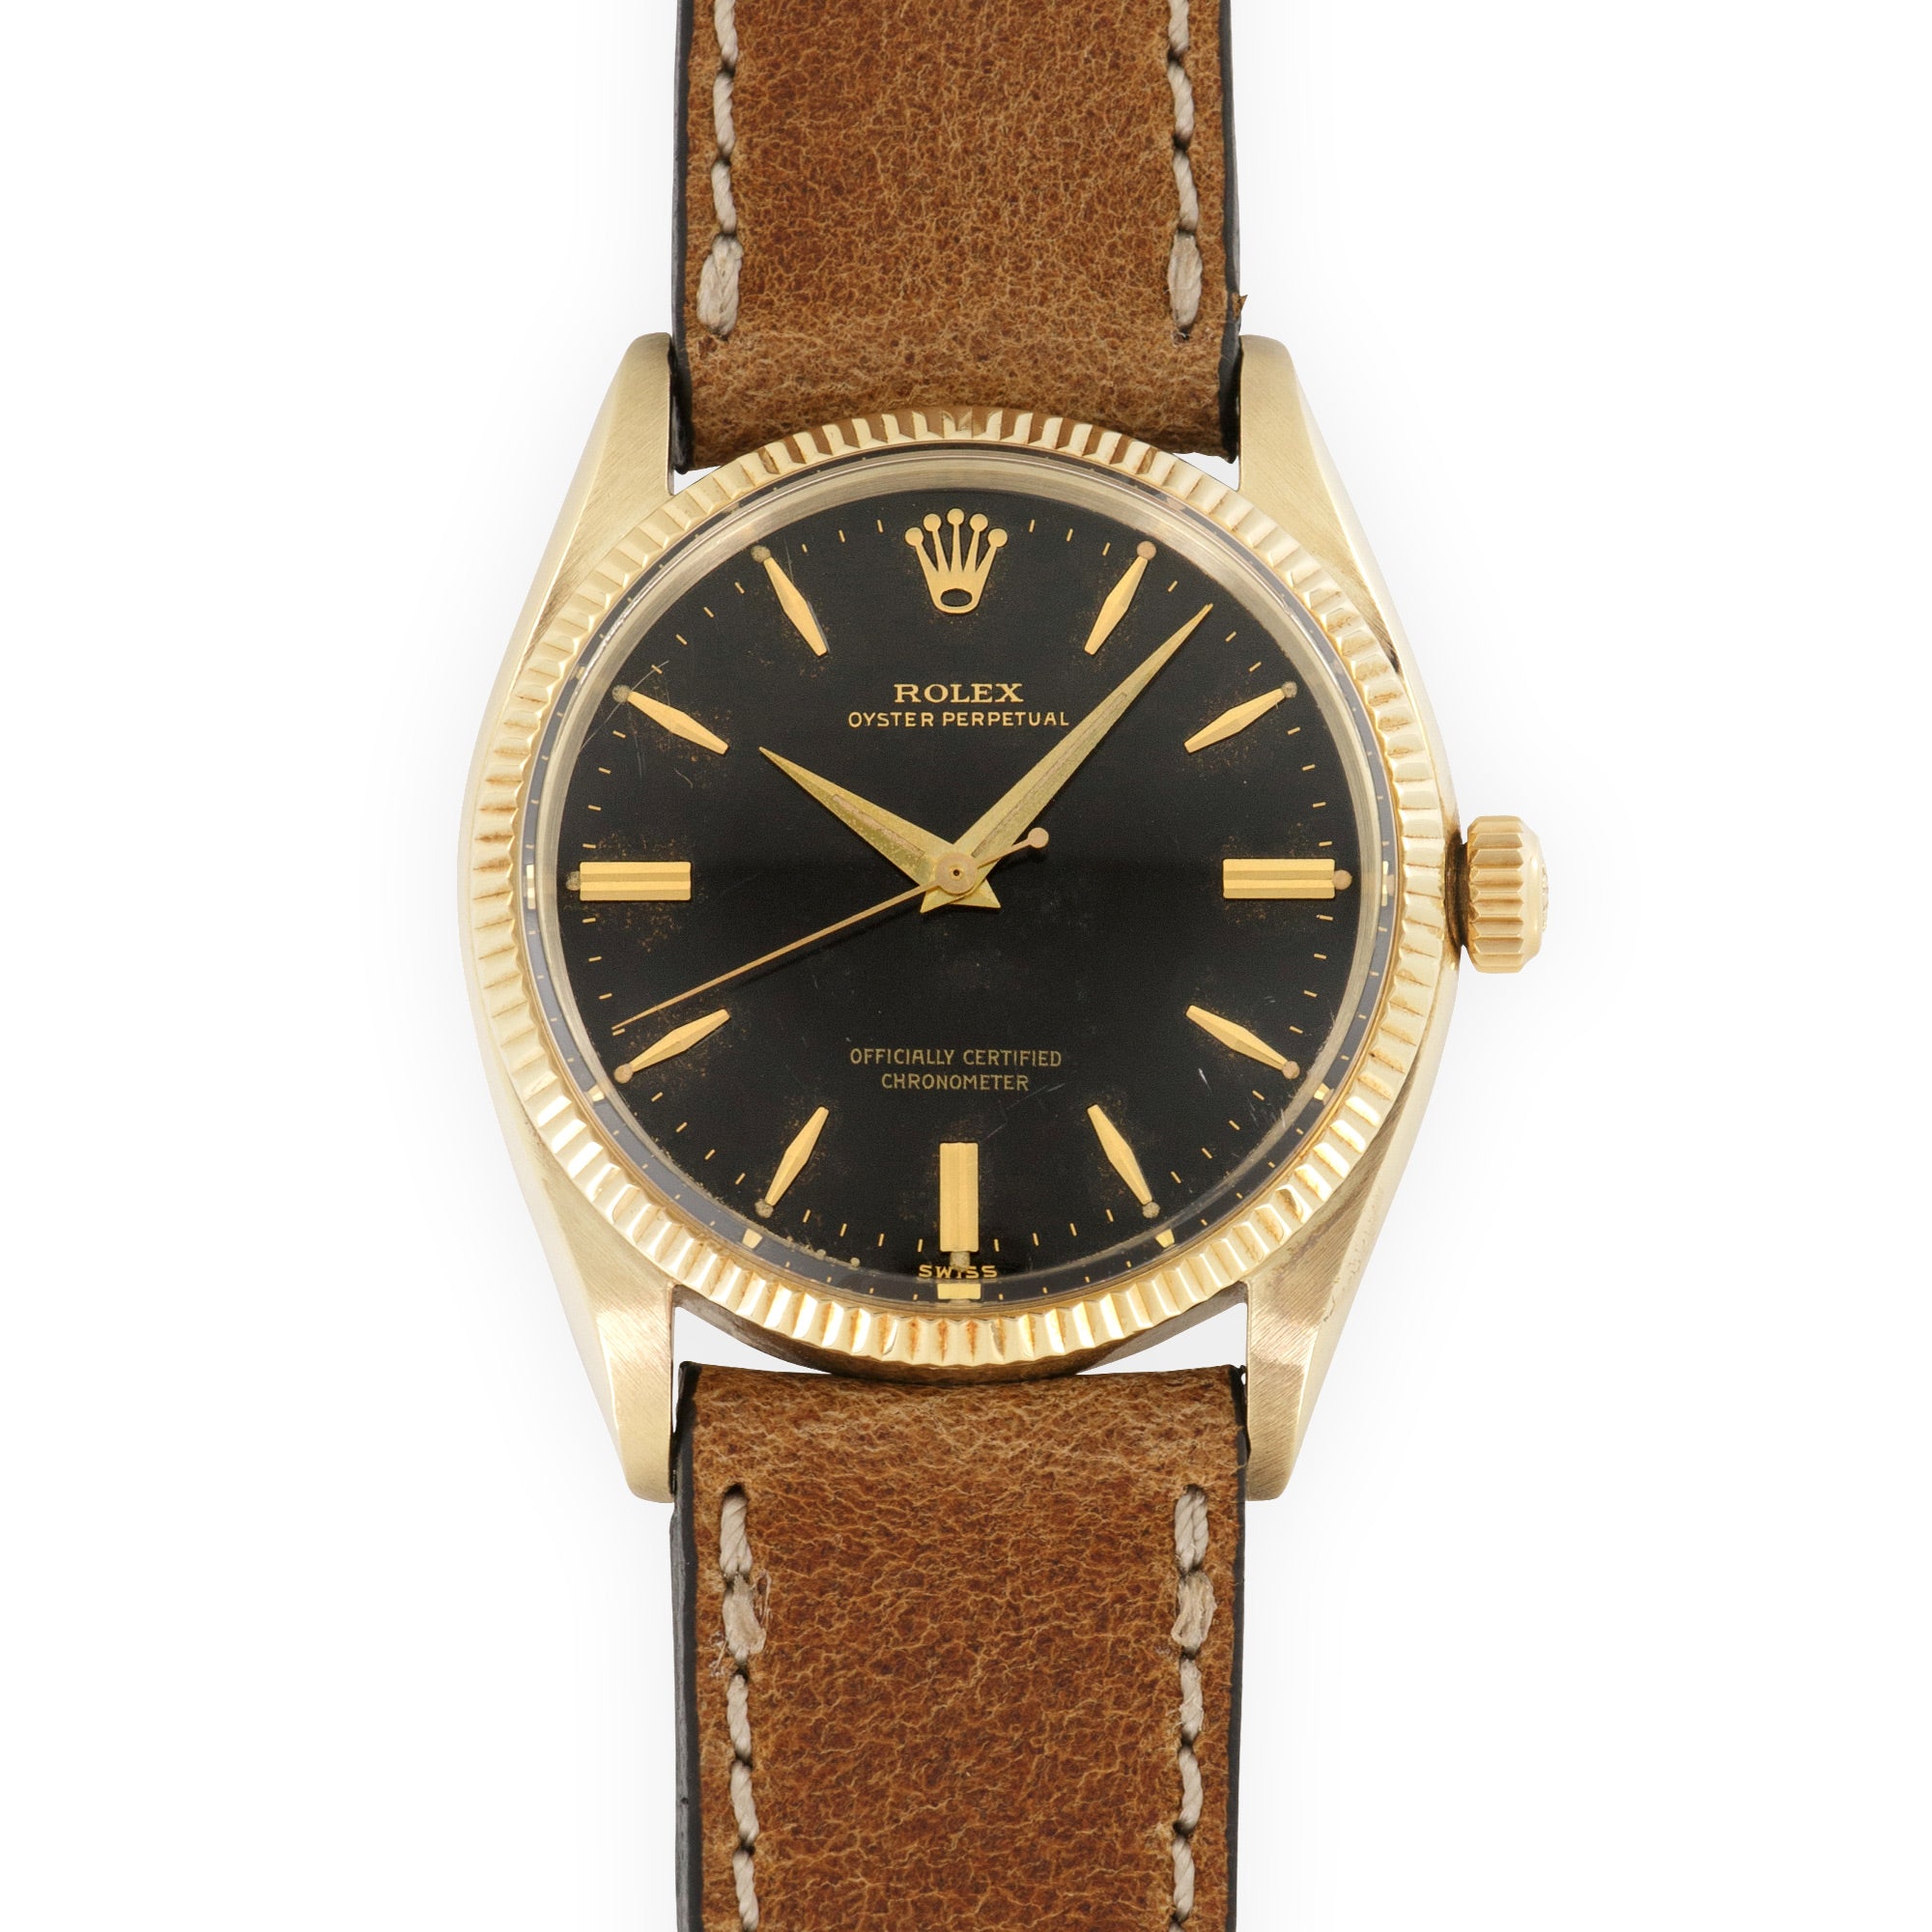 Rolex - Rolex Yellow Gold Oyster Perpetual Black Gilt Dial Watch Ref. 6567 - The Keystone Watches